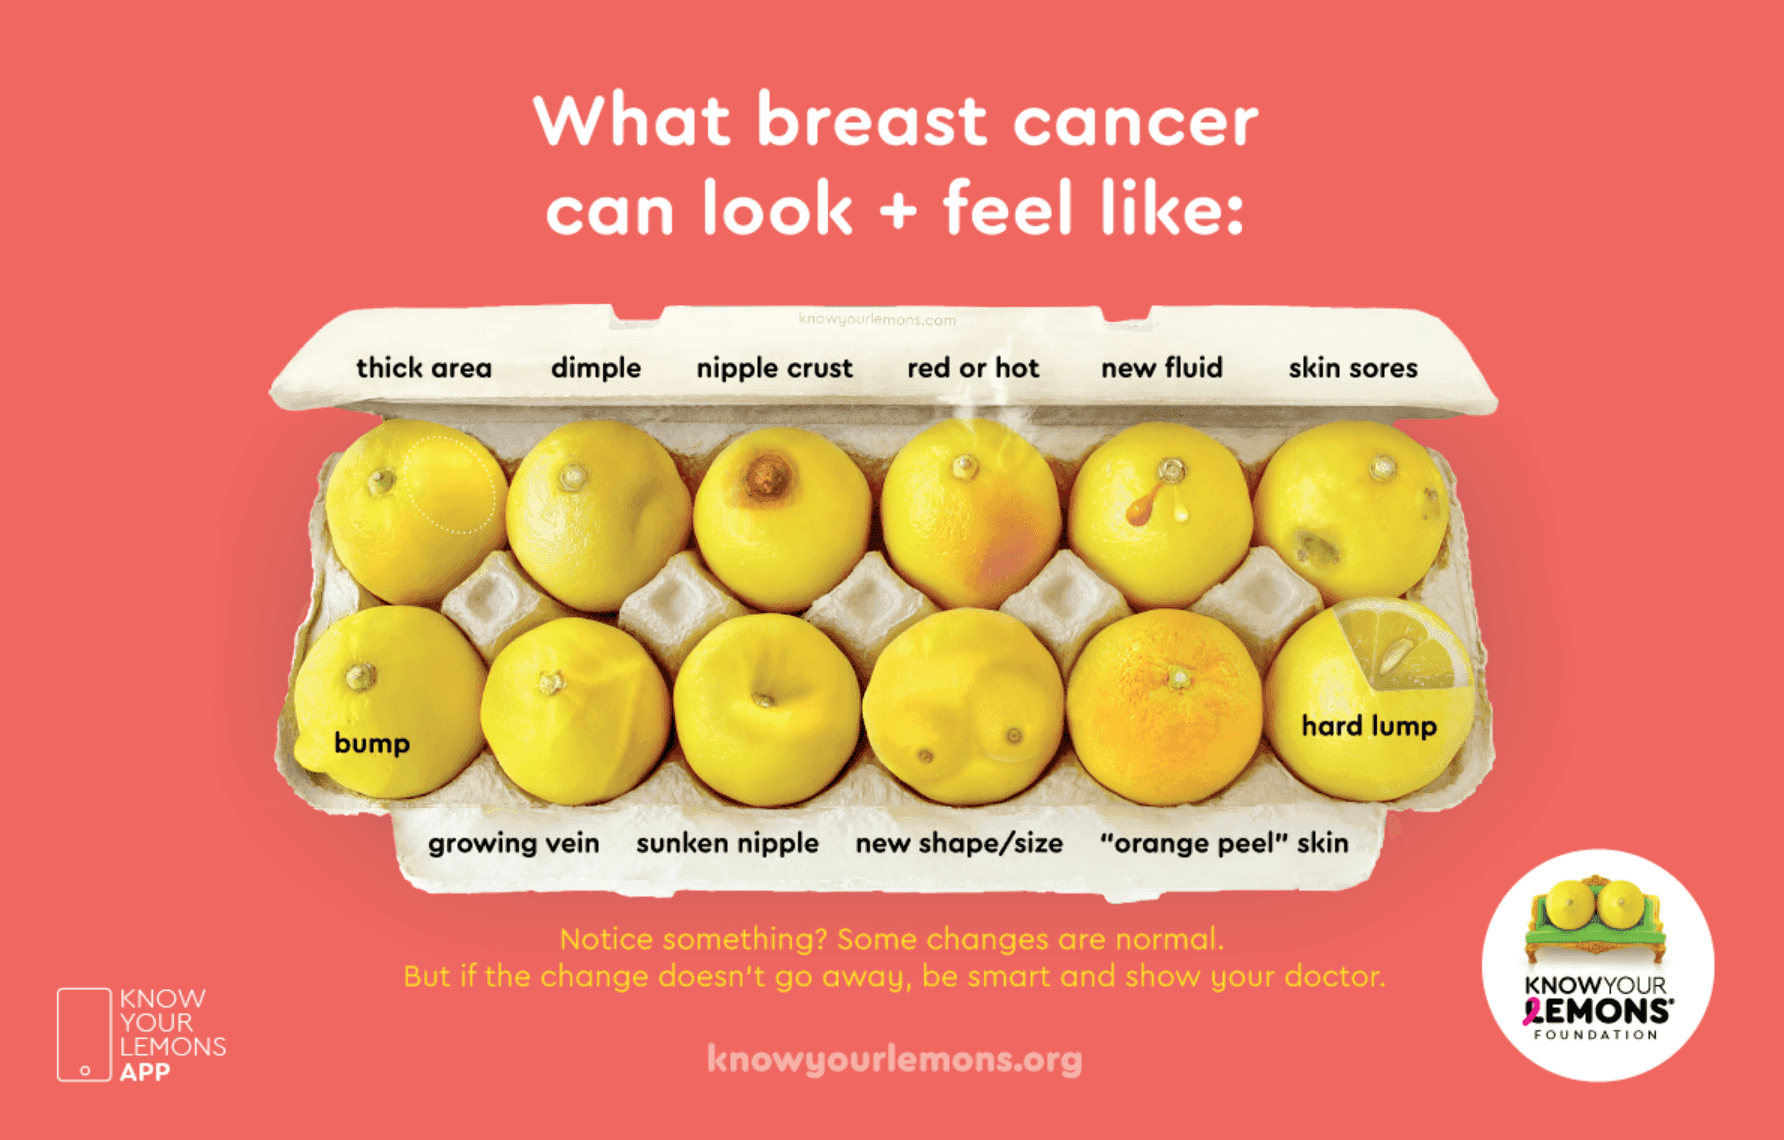 image of an egg carton full of lemons to illustrate different breast cancer warning signs on the lemons